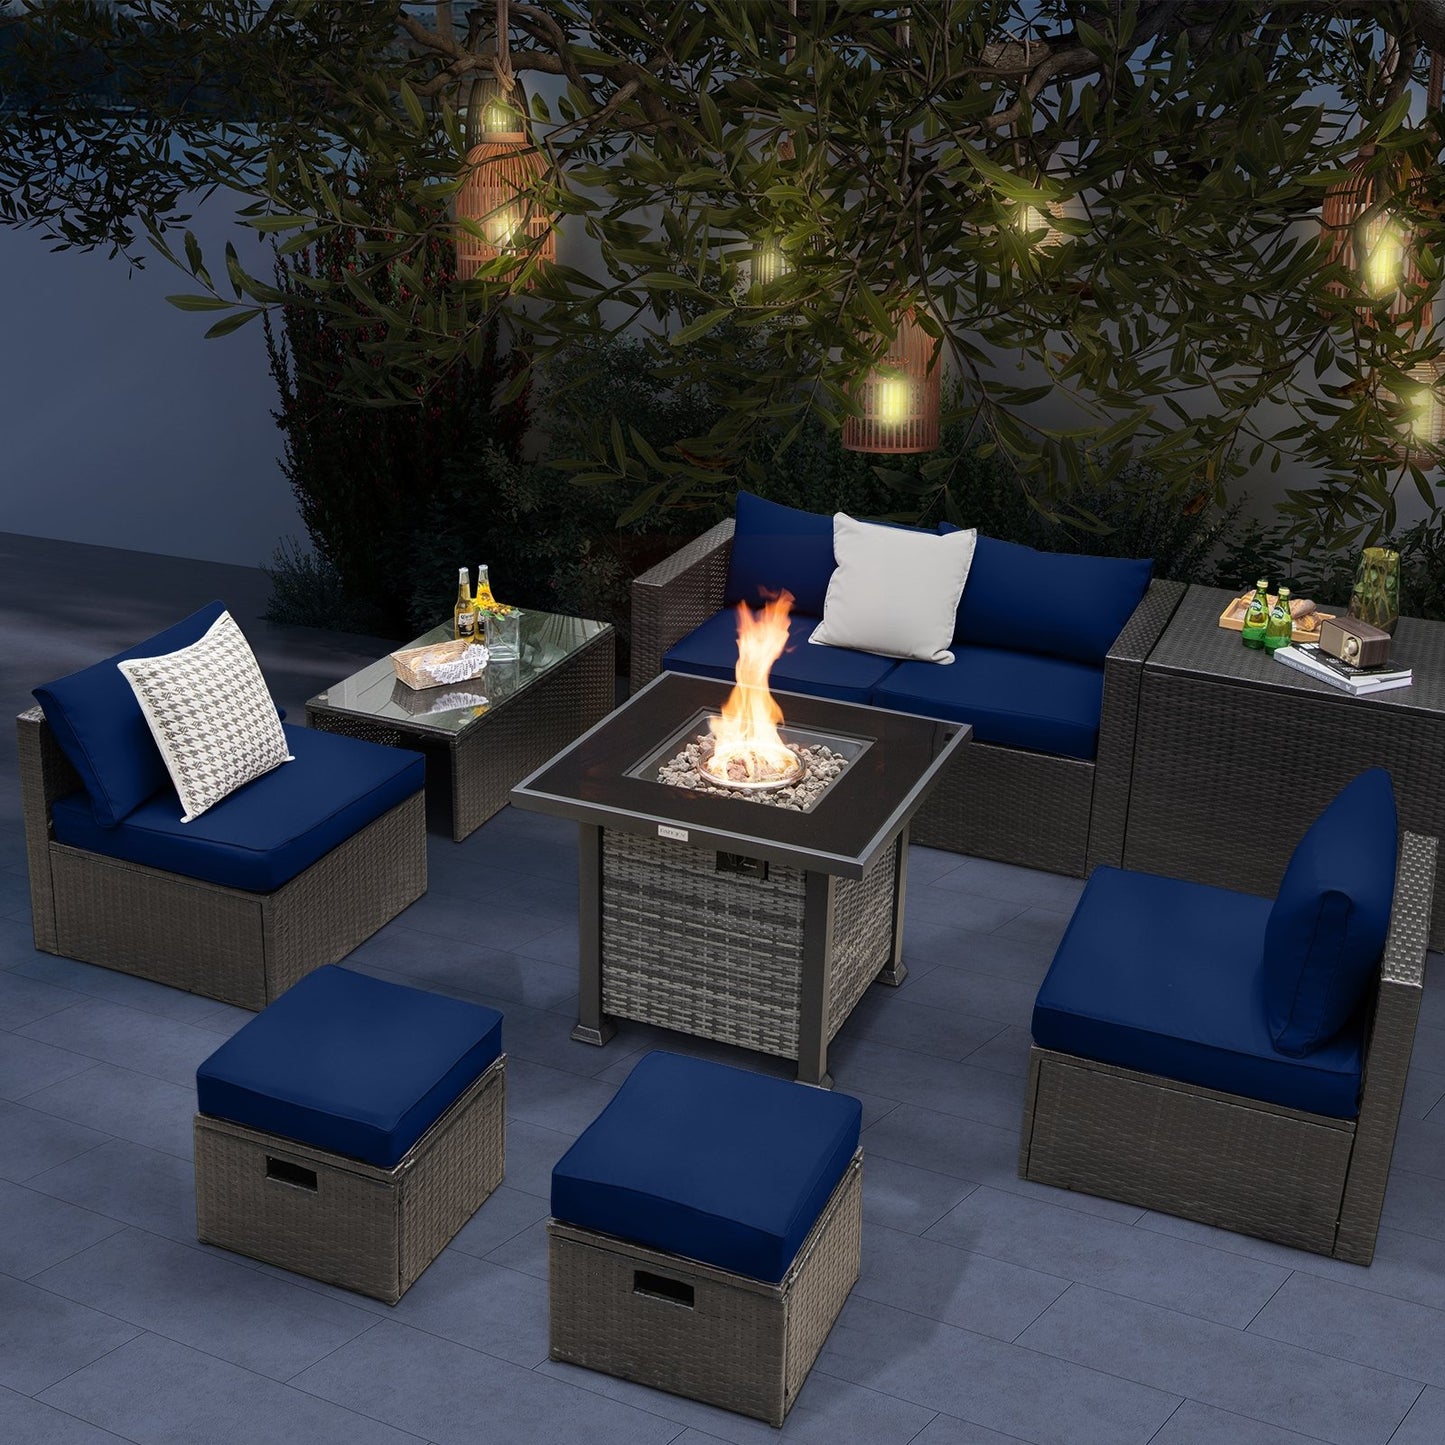 Outdoor 9 Pieces Patio Furniture Set with 50 000 BTU Propane Fire Pit Table, Navy